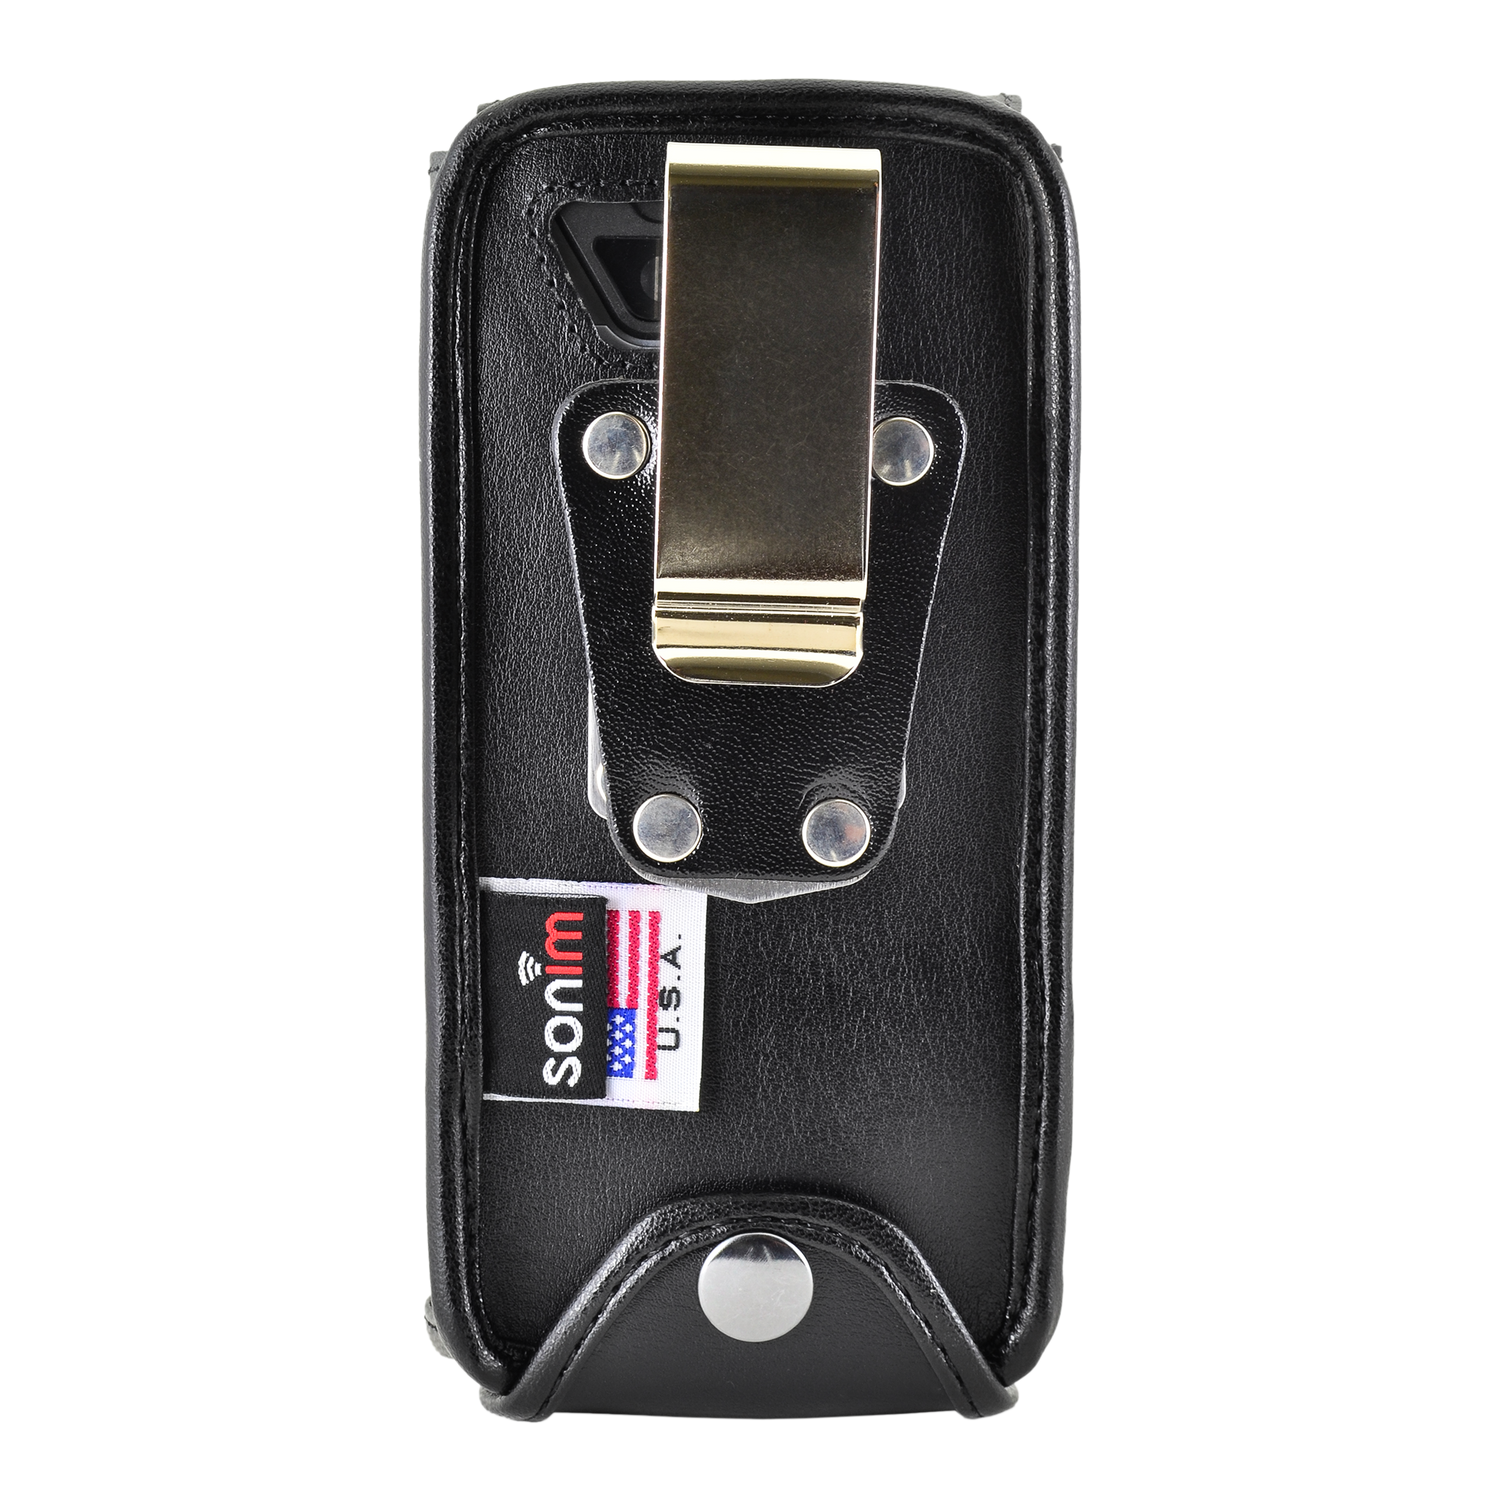 Sonim carrying case for XP5s with metal clip. 